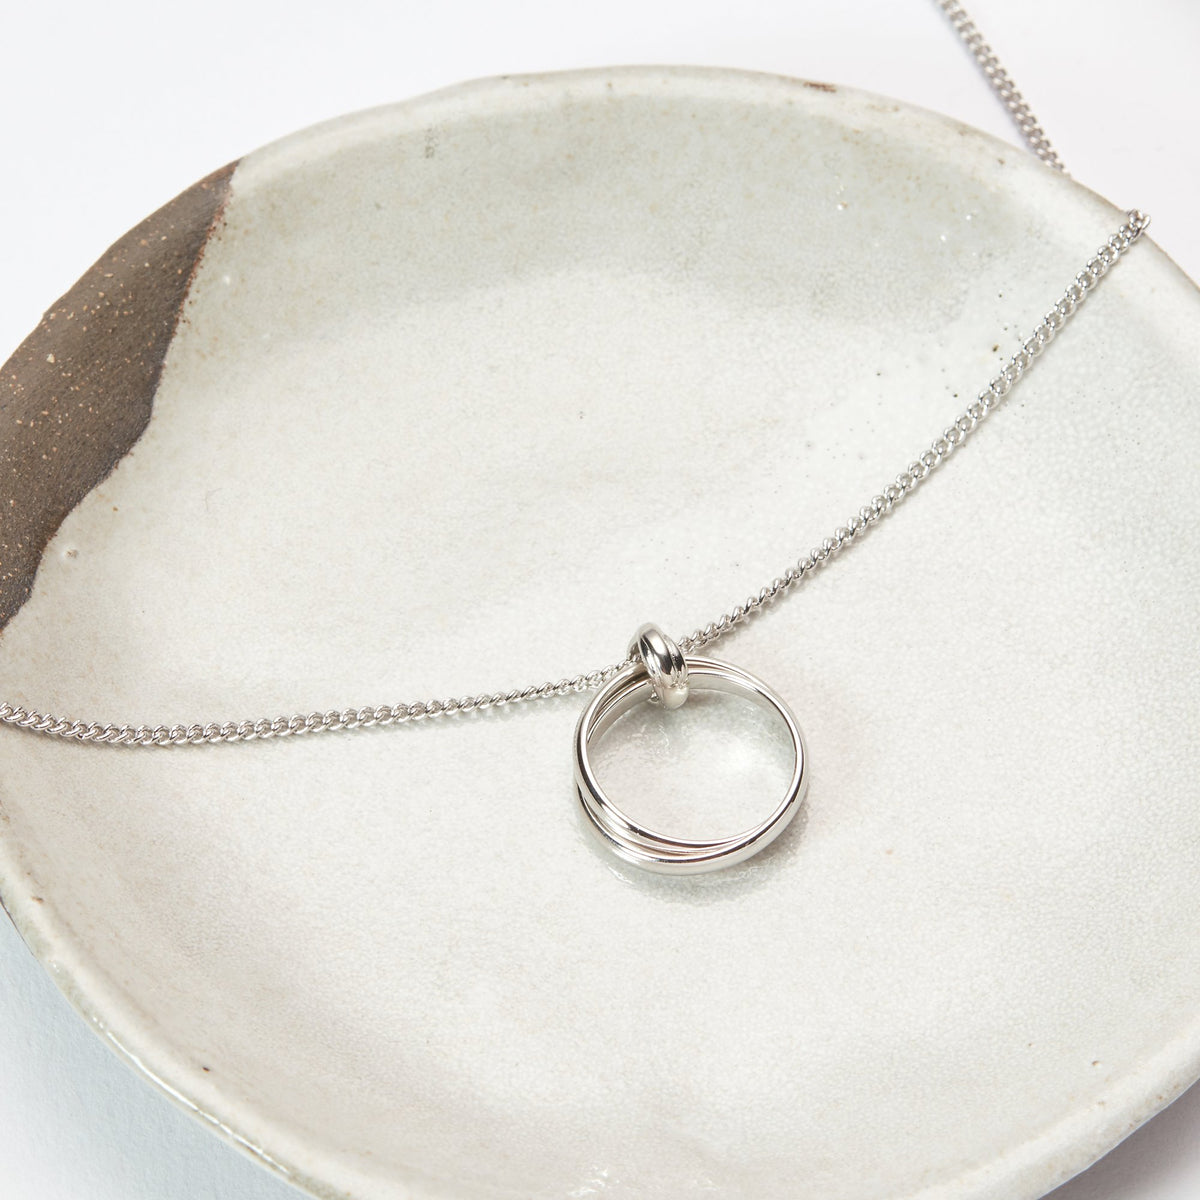 Daughter-In-Law Linked Circles Necklace